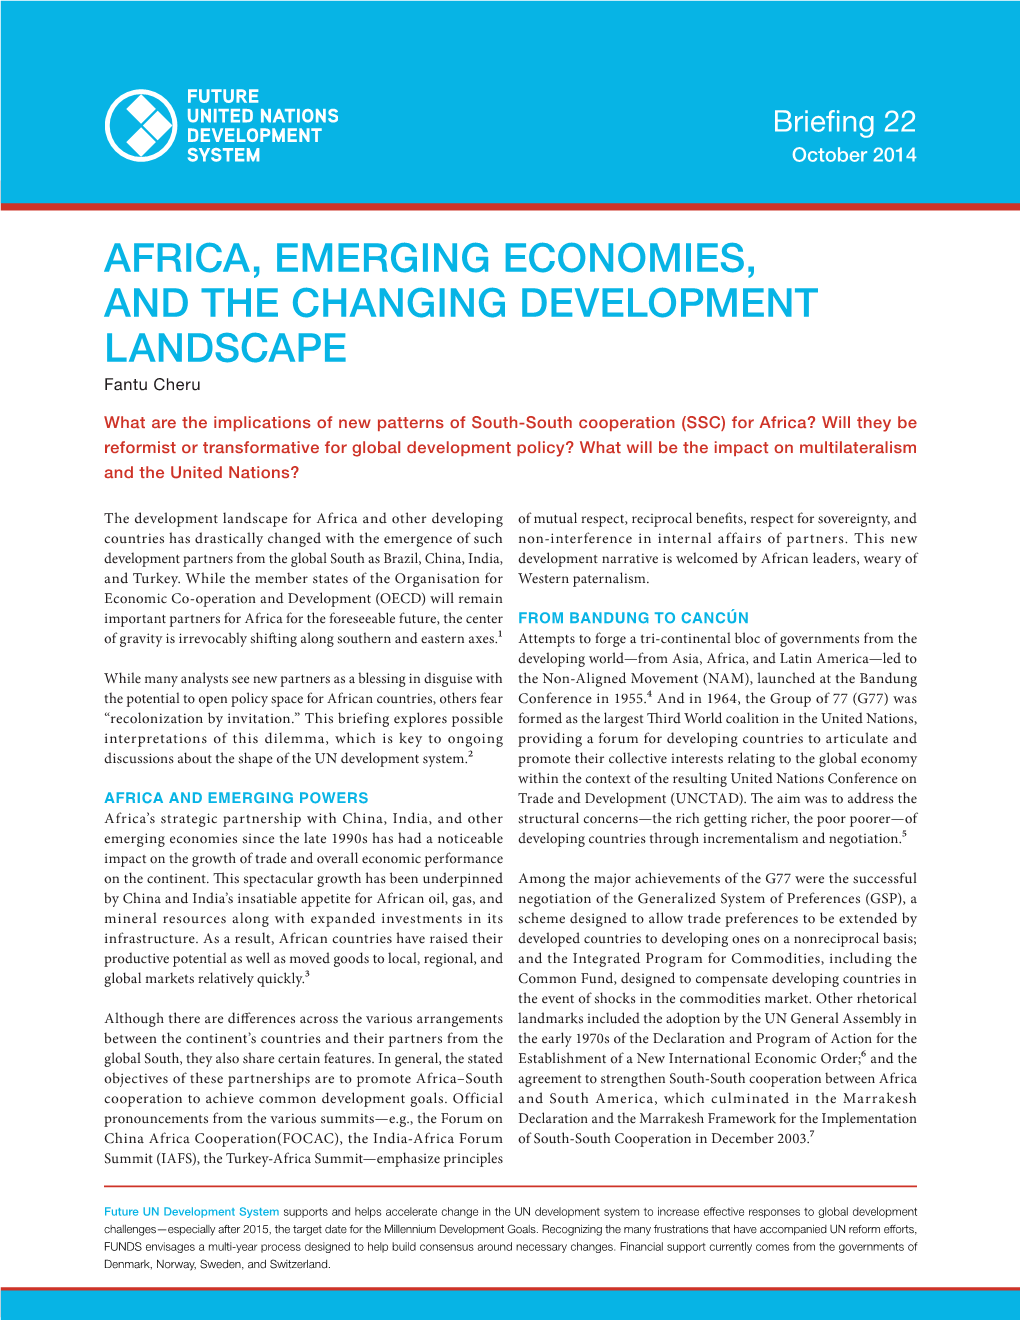 'Africa, Emerging Economies and the Changing Development Landscape